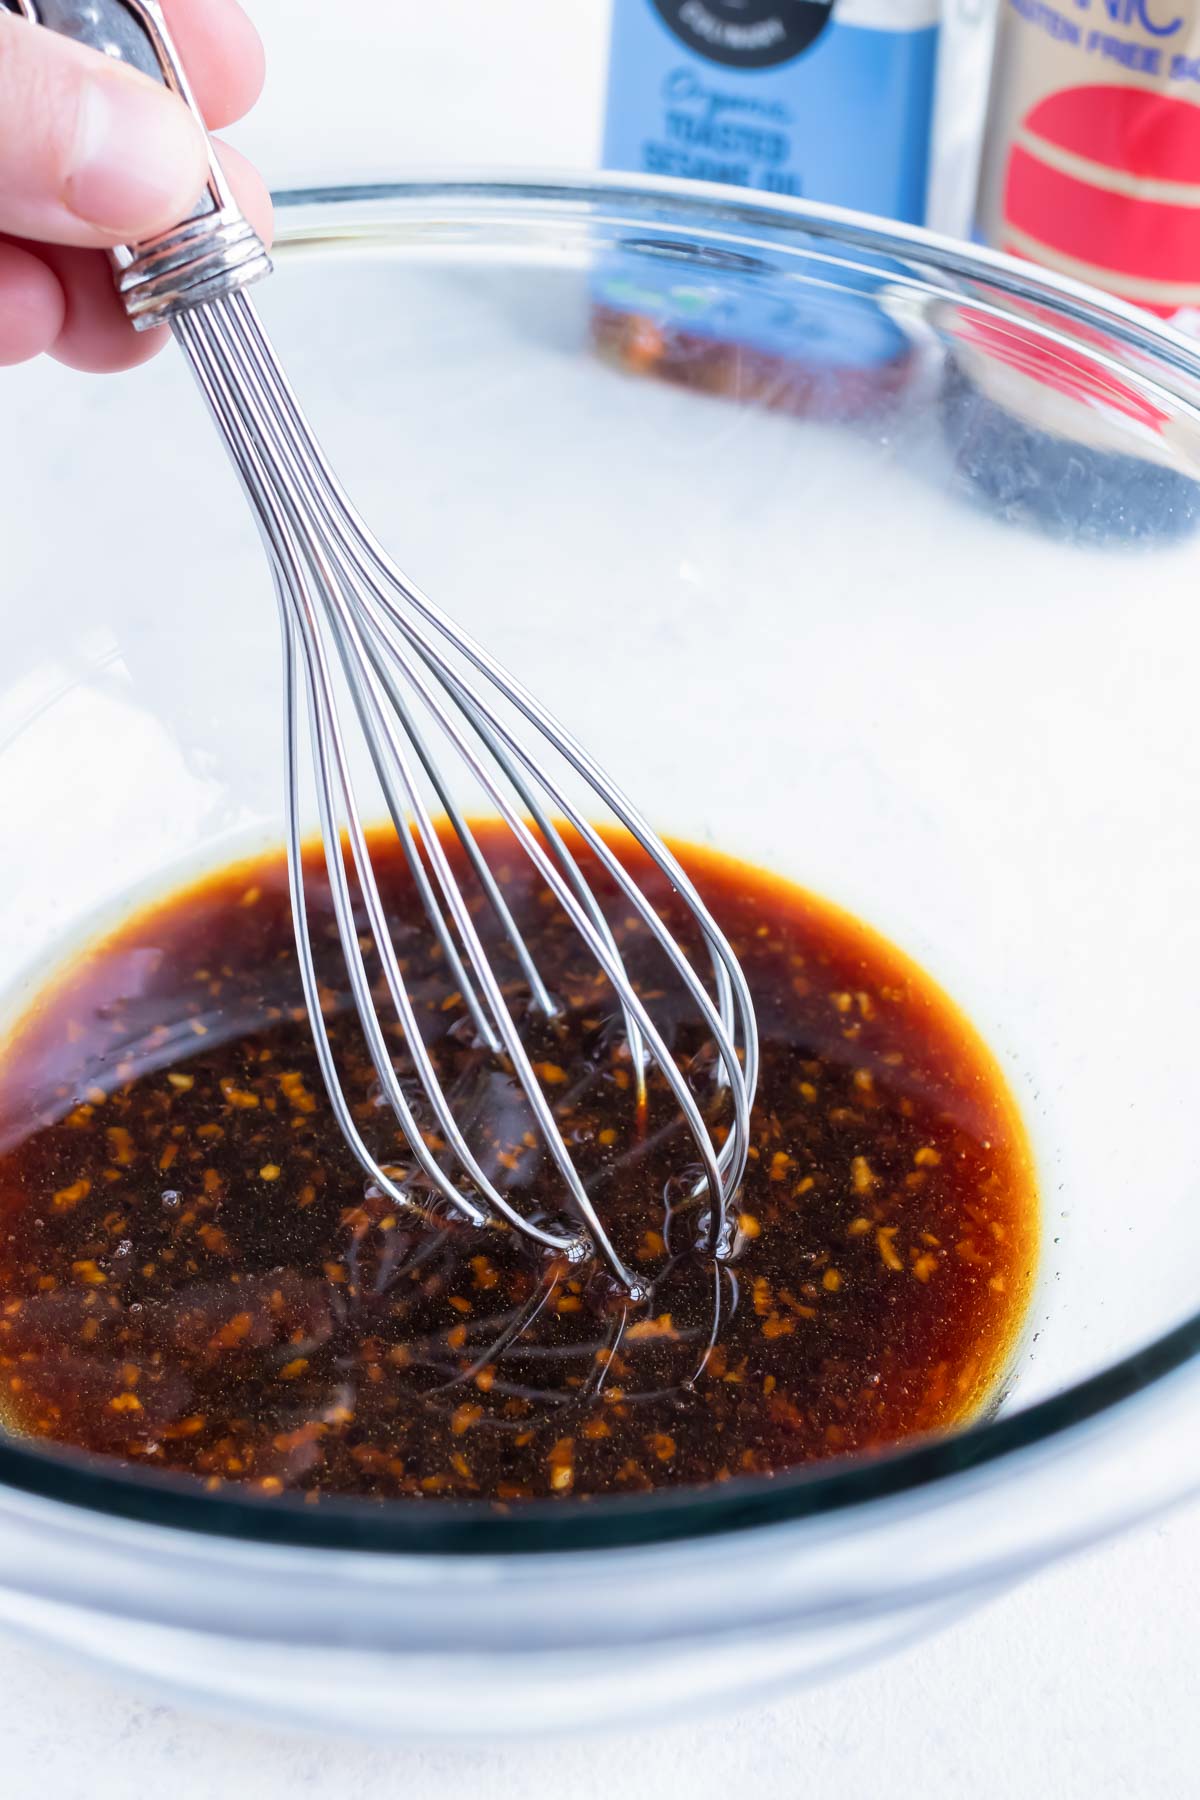 Sauce ingredients are whisked together in a glass bowl.